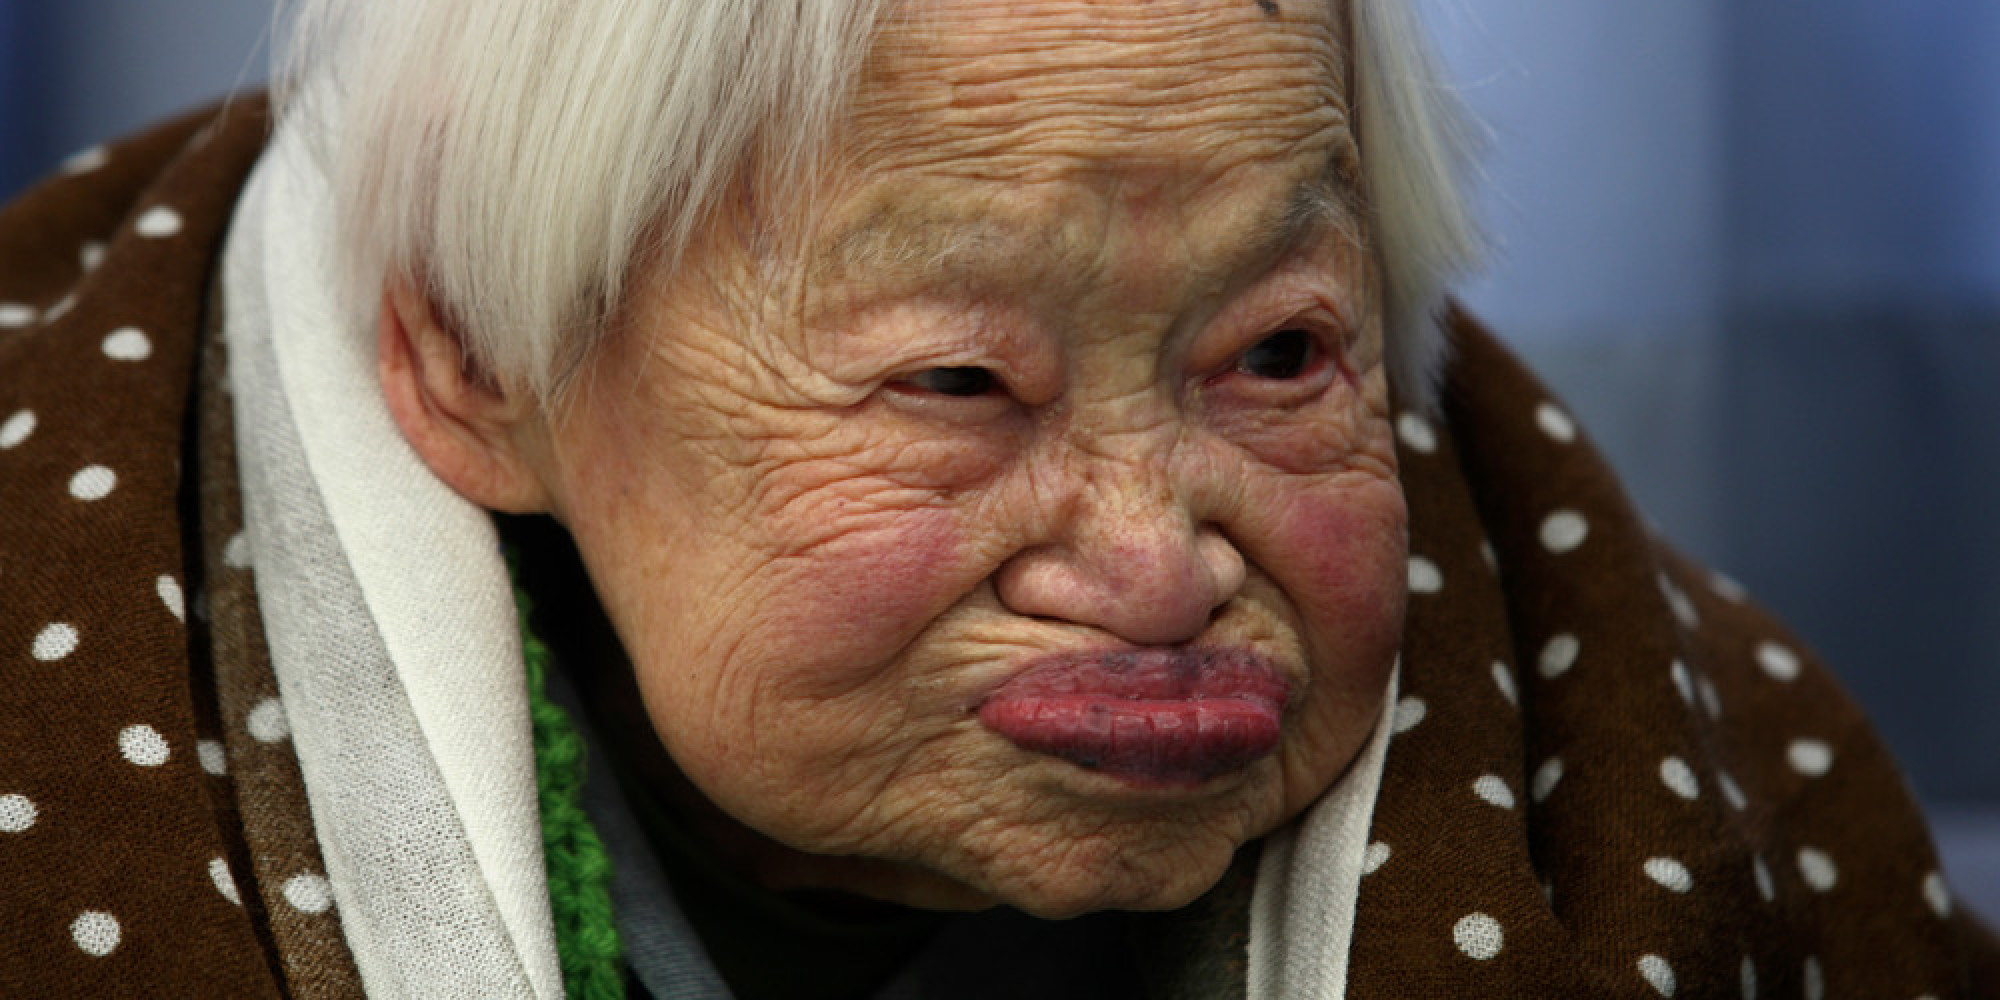 Eat Sleep And Relax Worlds Oldest Person Shares Secret To Longevity On 116th Birthday 